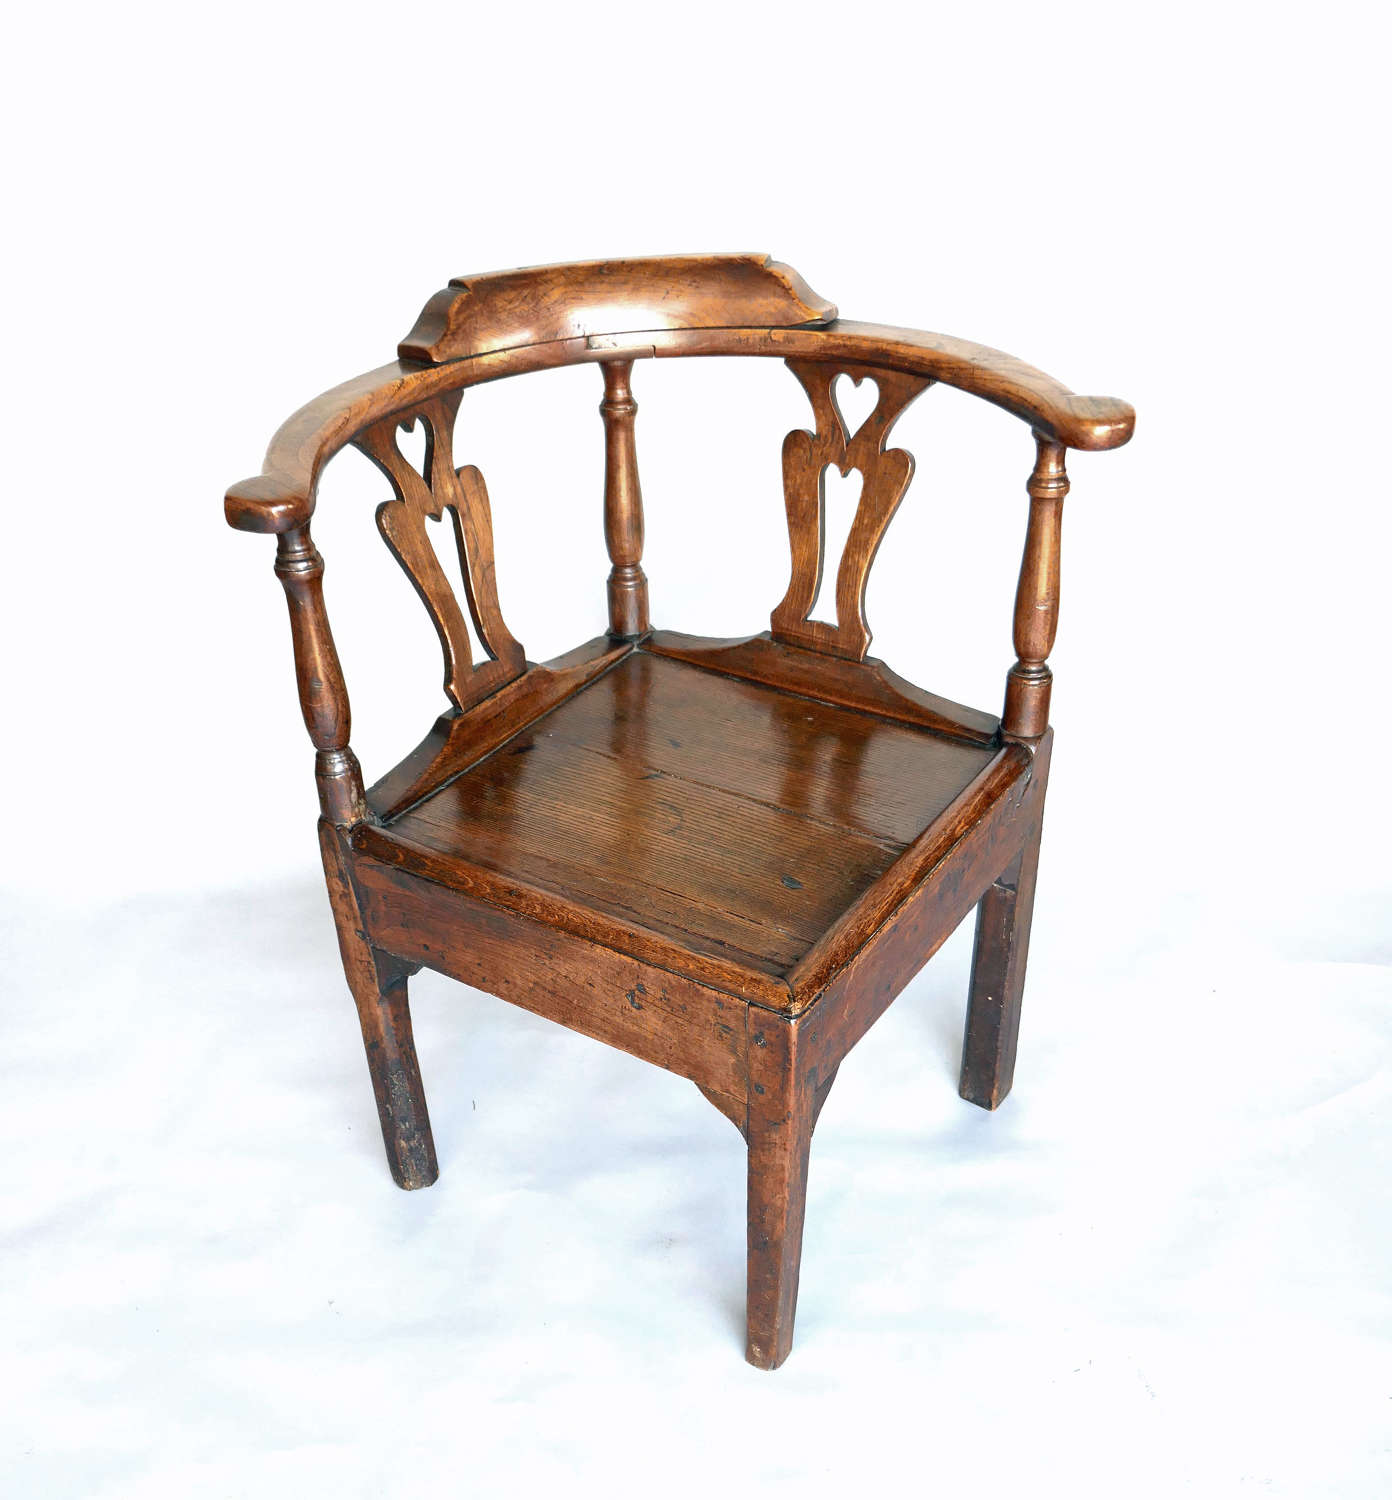 Antique Country Furniture 18thc Elm, Ash, Fruitwood Corner Chair.